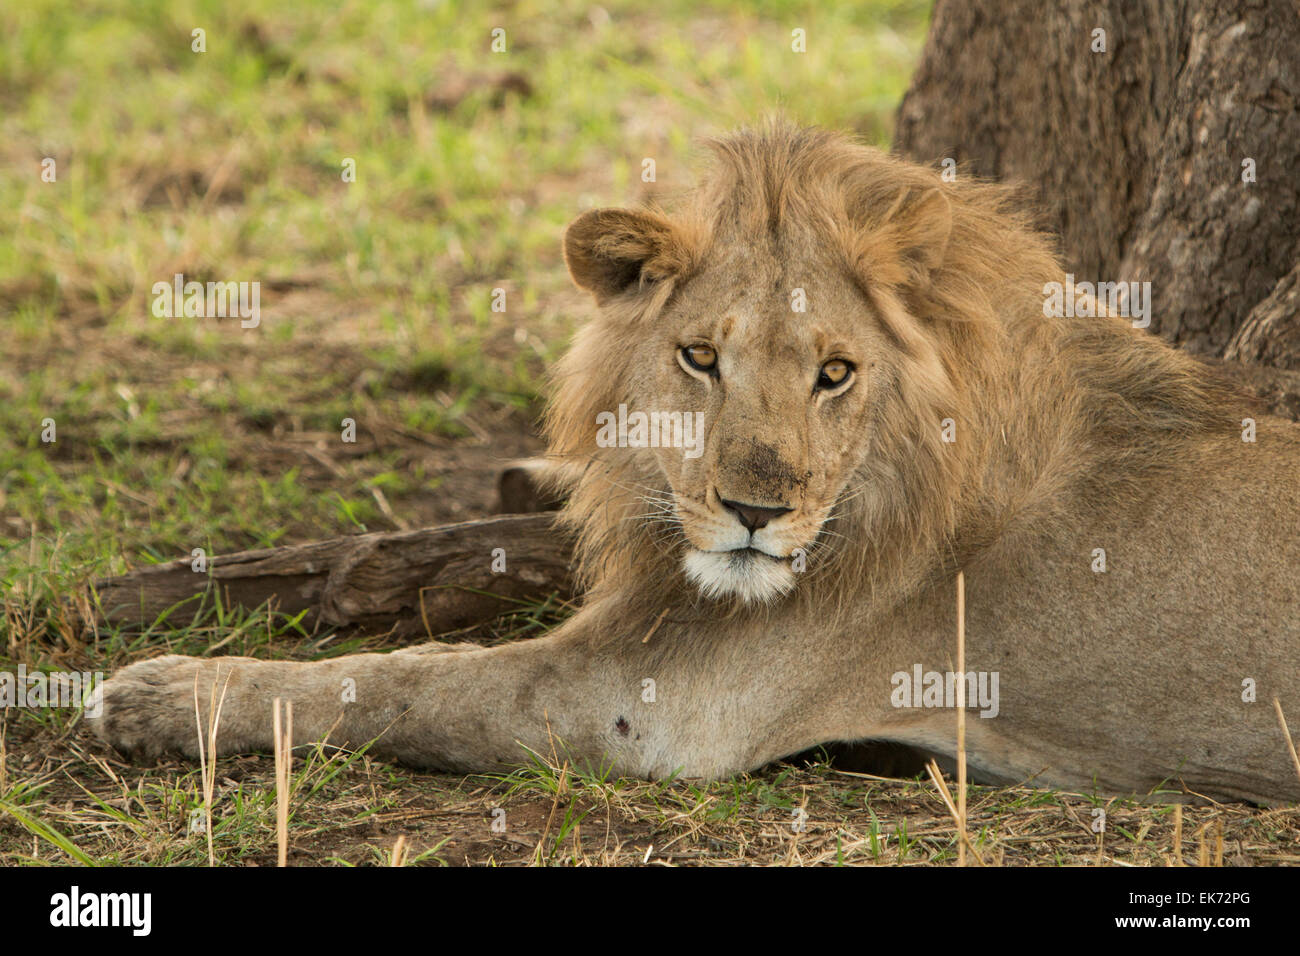 Lion at Kidepo Valley National Park in Northern Uganda, East Africa Stock Photo